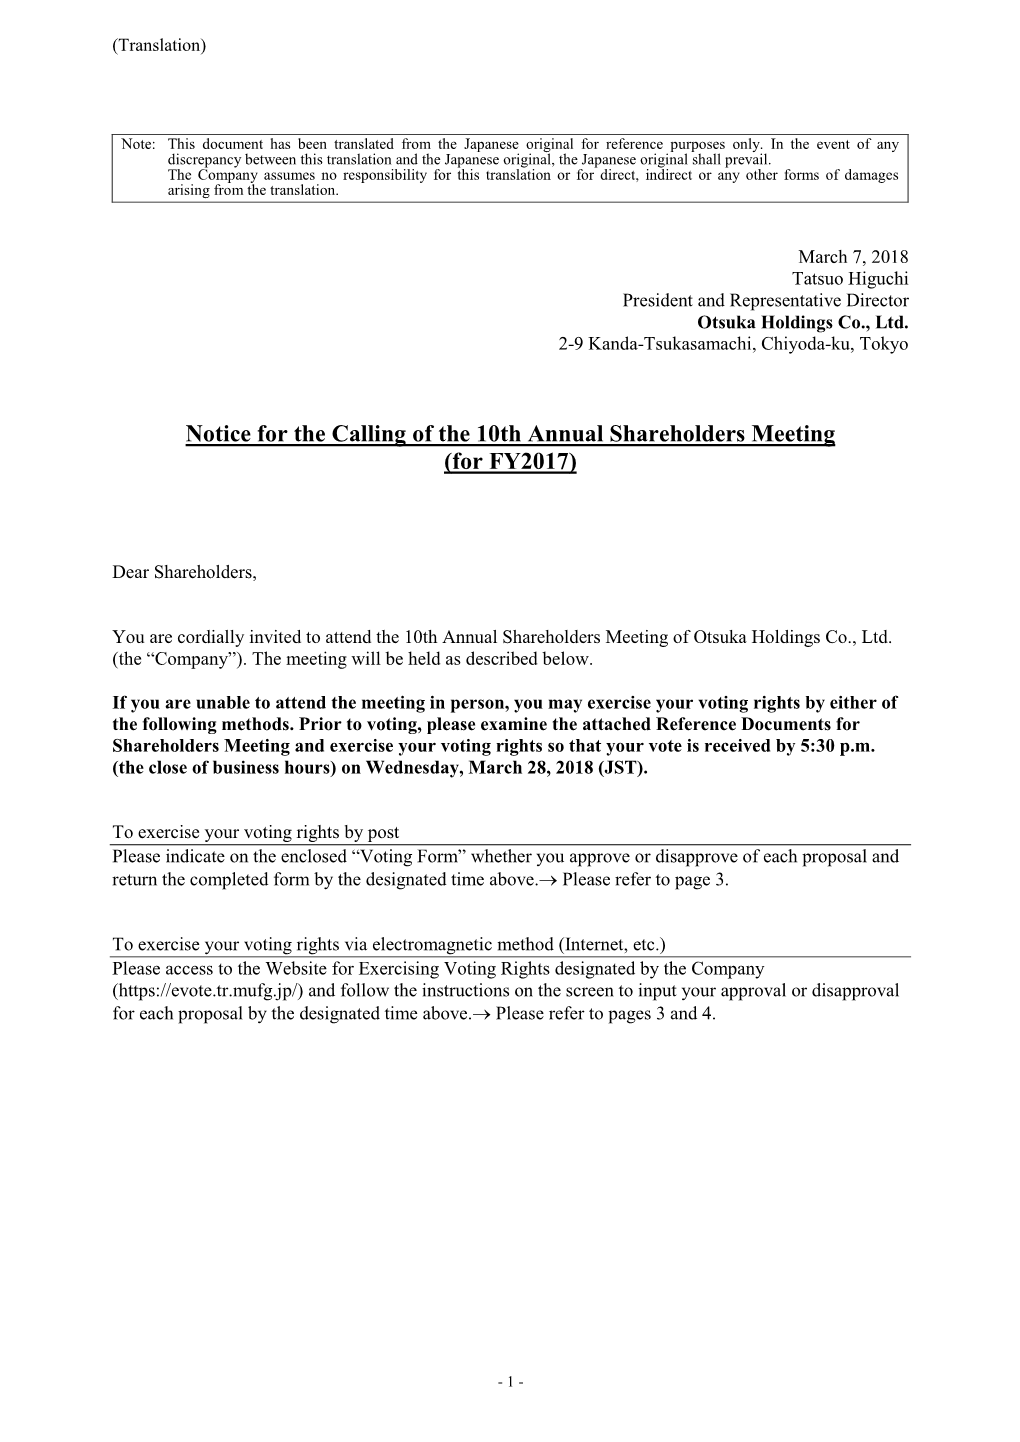 Notice for the Calling of the 10Th Annual Shareholders Meeting (For FY2017)